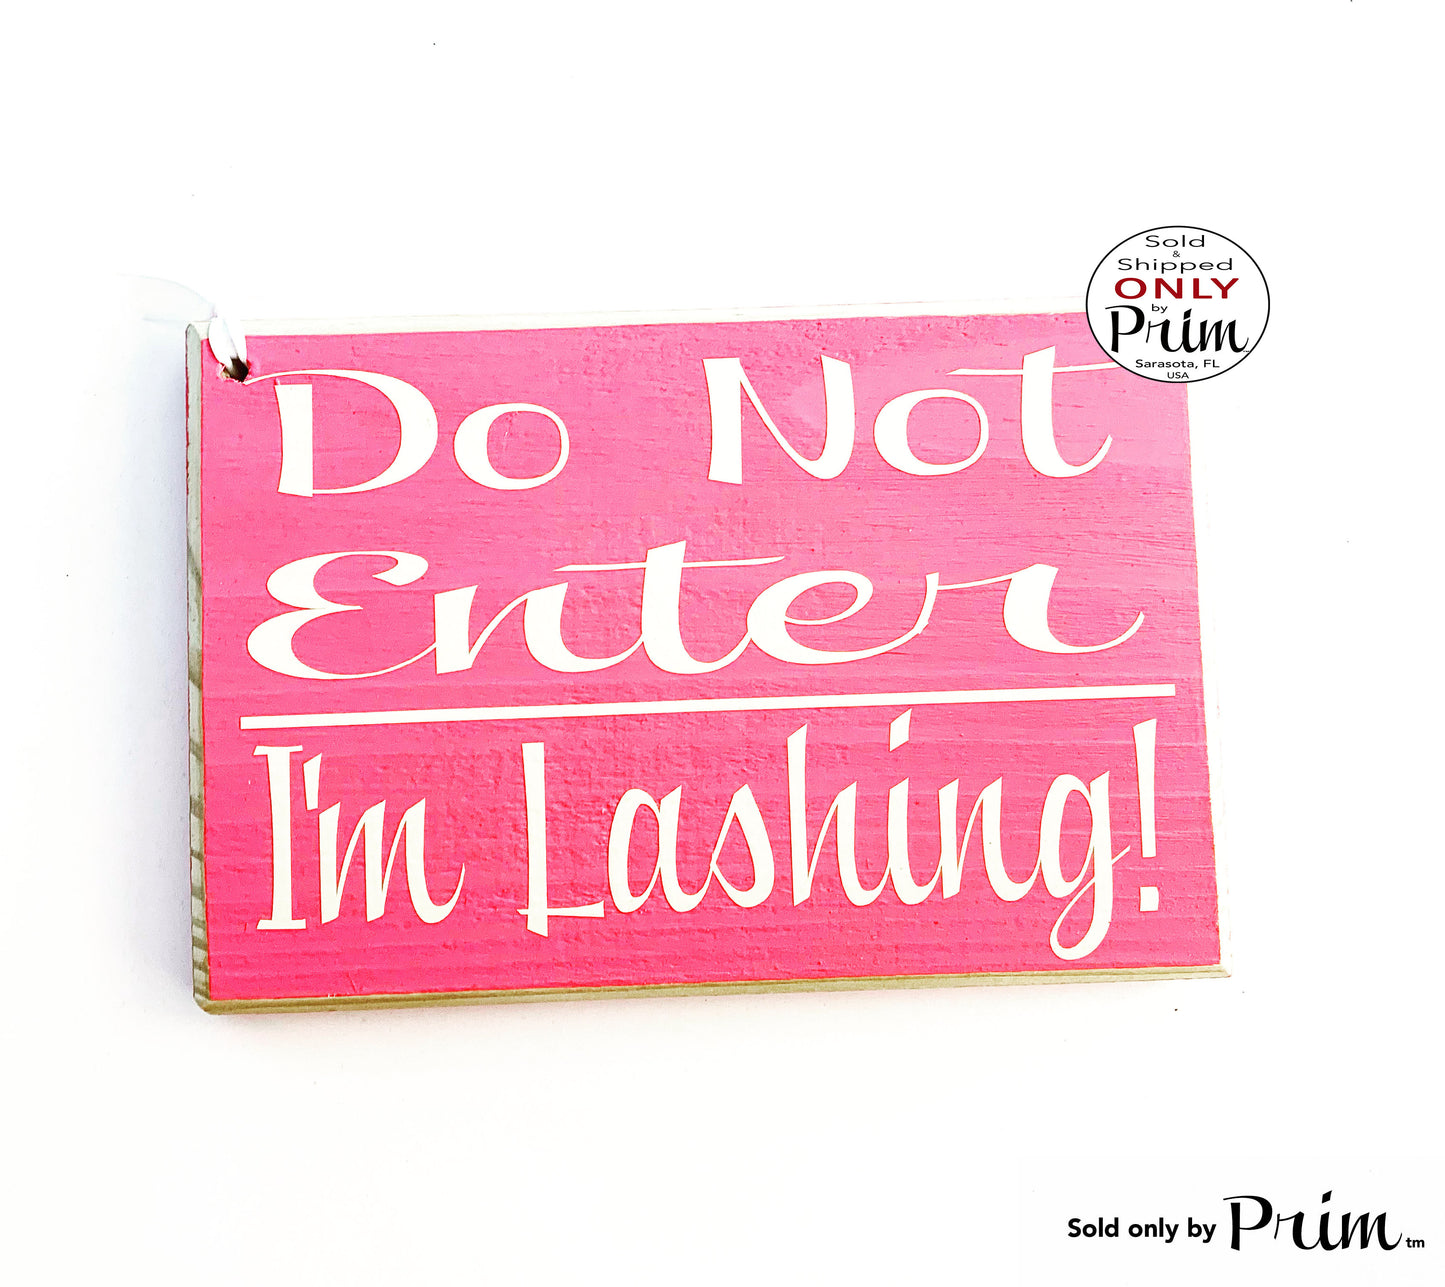 Designs by Prim 8x6 Do Not Enter I'm Lashing Custom Wood Sign In Progress Be With You Shortly Session Lashes Extensions Eyebrows Salon Door Plaque